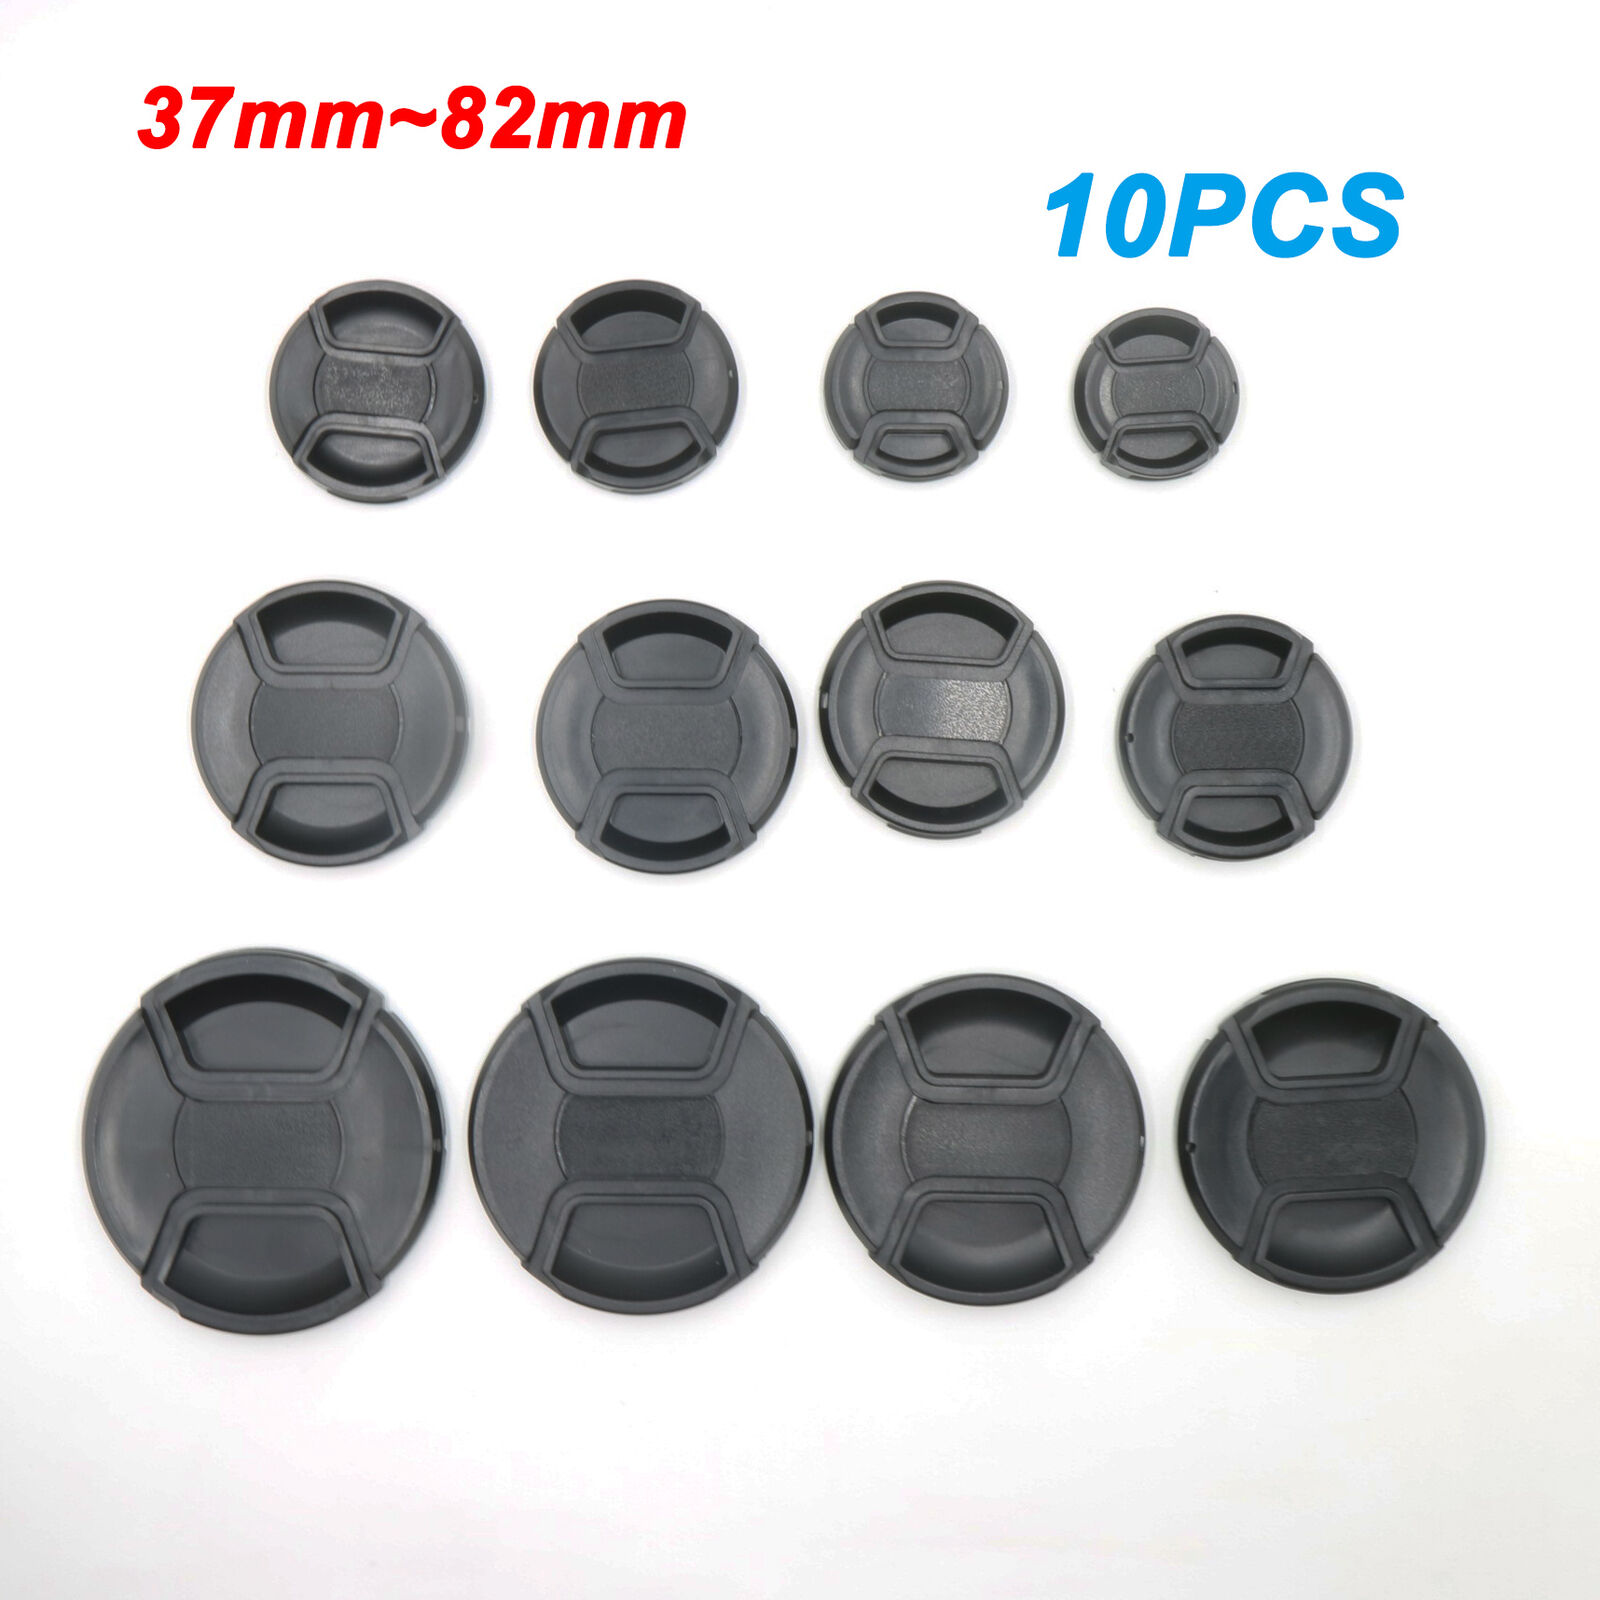 37mm ~ 82mm 10x Snap-on Camera Front Lens Cap Cover For Canon Leica Nikon Sony